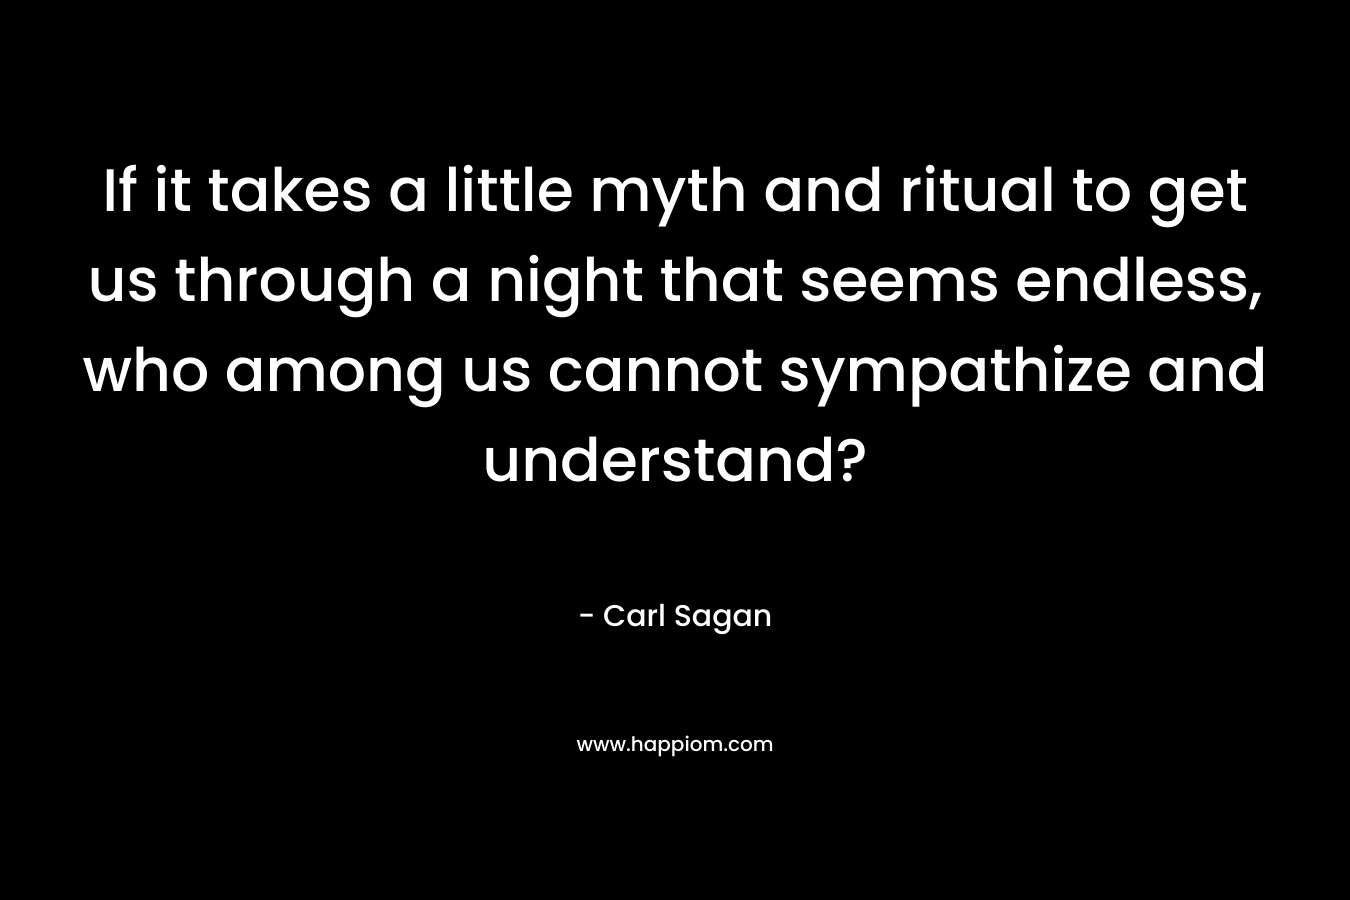 If it takes a little myth and ritual to get us through a night that seems endless, who among us cannot sympathize and understand? – Carl Sagan